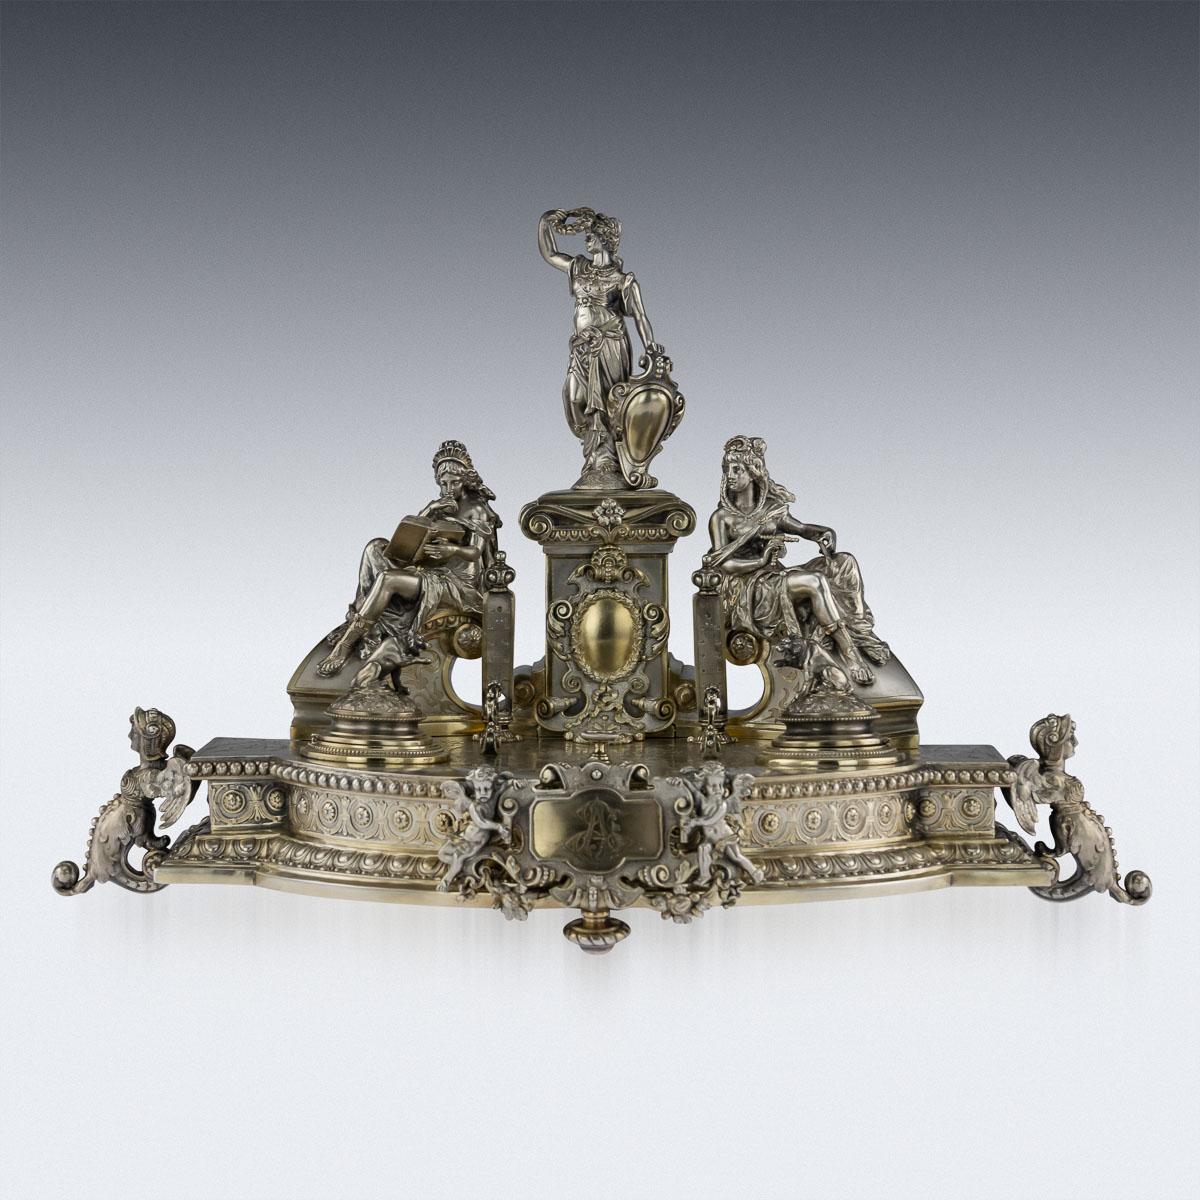 Antique late 19th century German impressive silver-gilt desk stand, the shaped oval base on three plain stud feet and two winged demi-female figure feet, with foliage and rosette borders. This exceptional inkstand is fitted with a twist bell, two